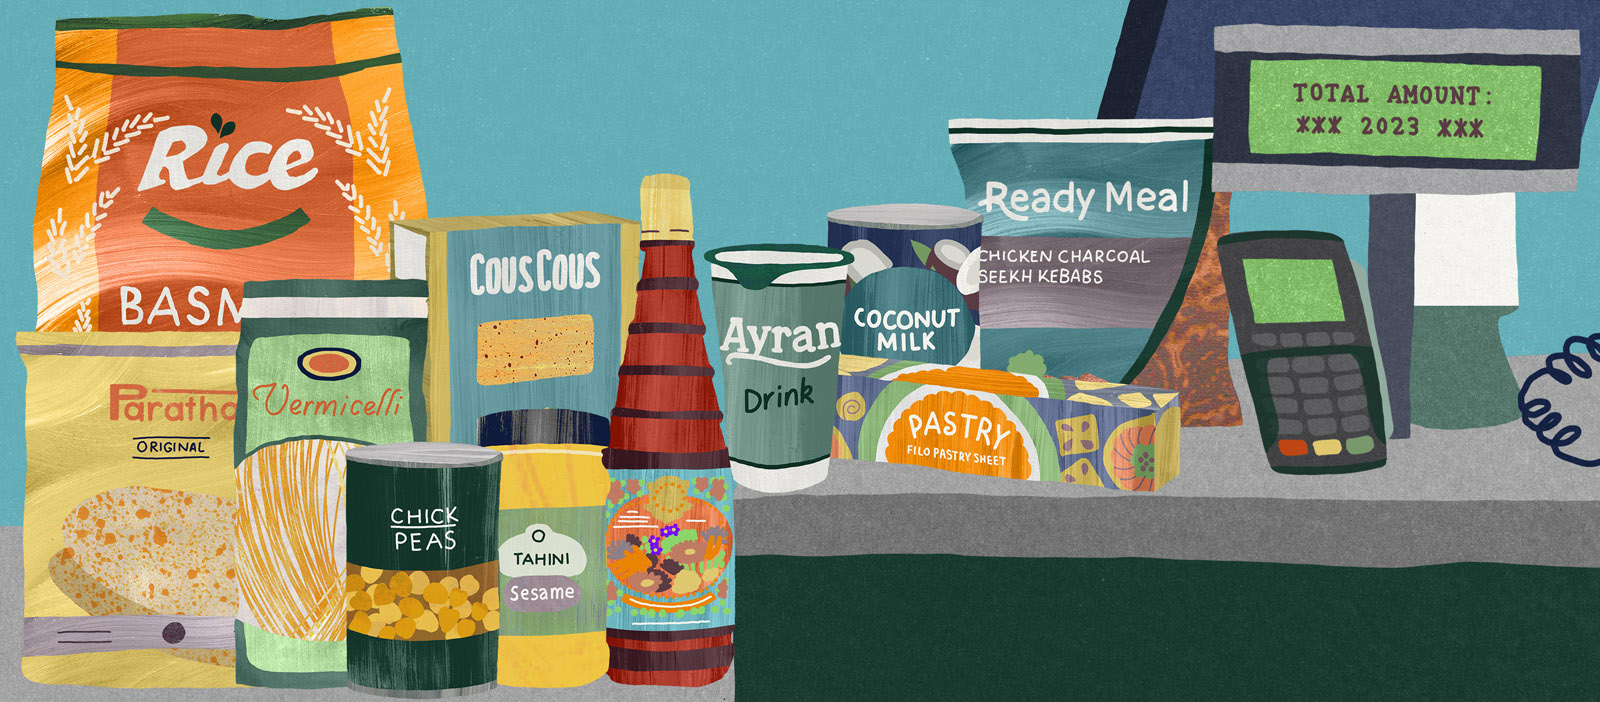 Ramadan 2023 Food Staples Iftar Cost of Living -  Illustrations for Hyphen by Jess Knights